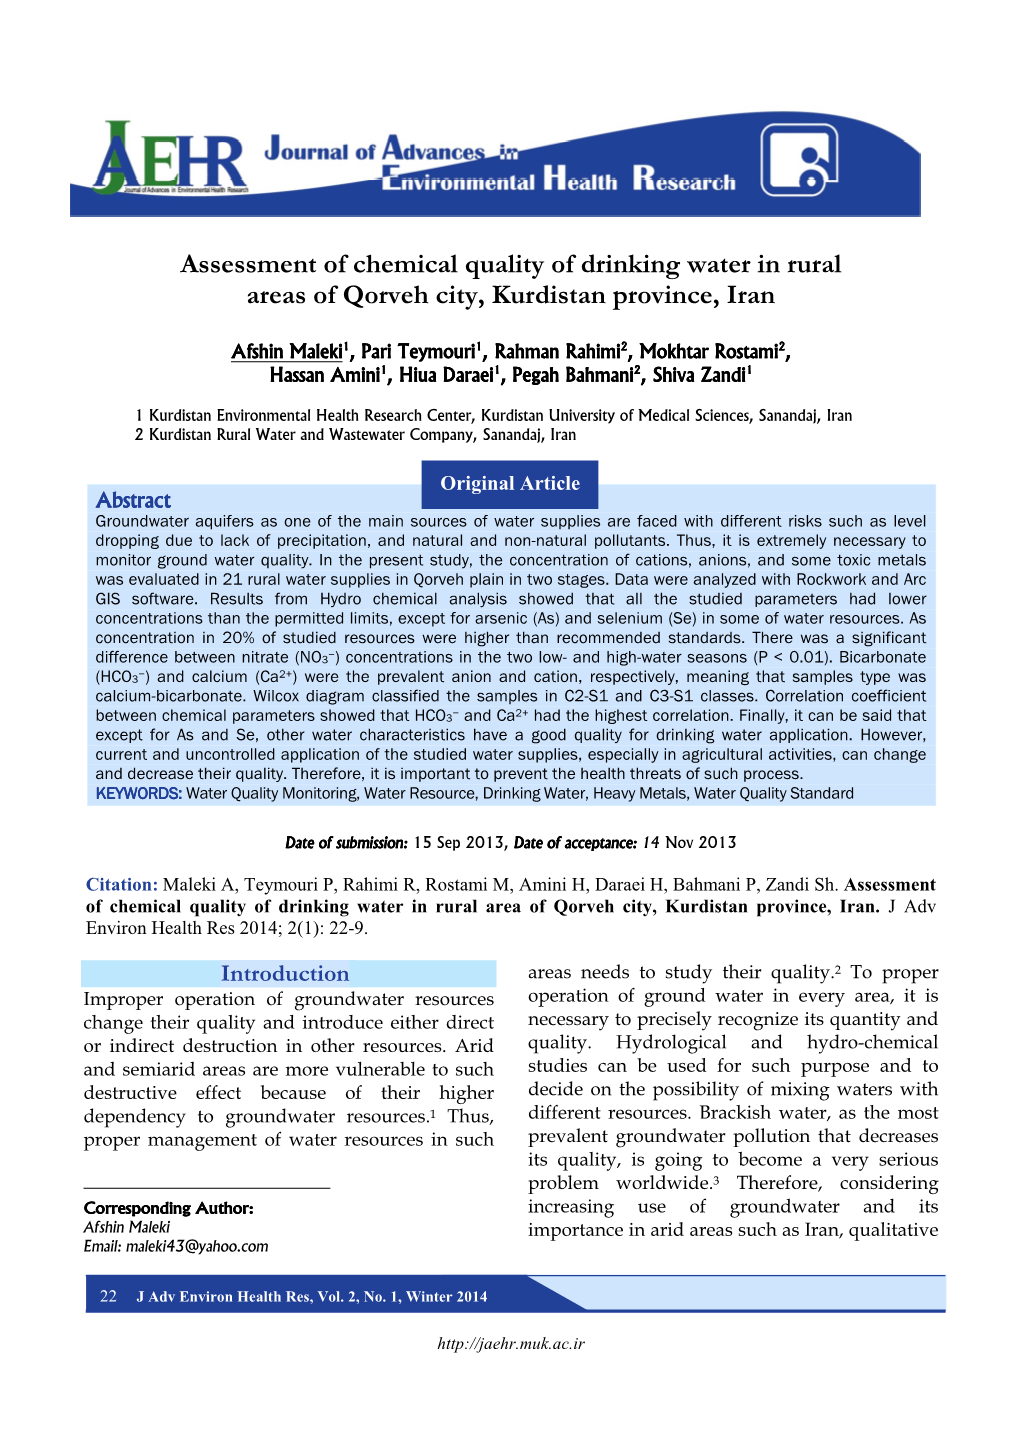 Assessment of Chemical Quality of Drinking Water in Rural Areas of Qorveh City, Kurdistan Province, Iran